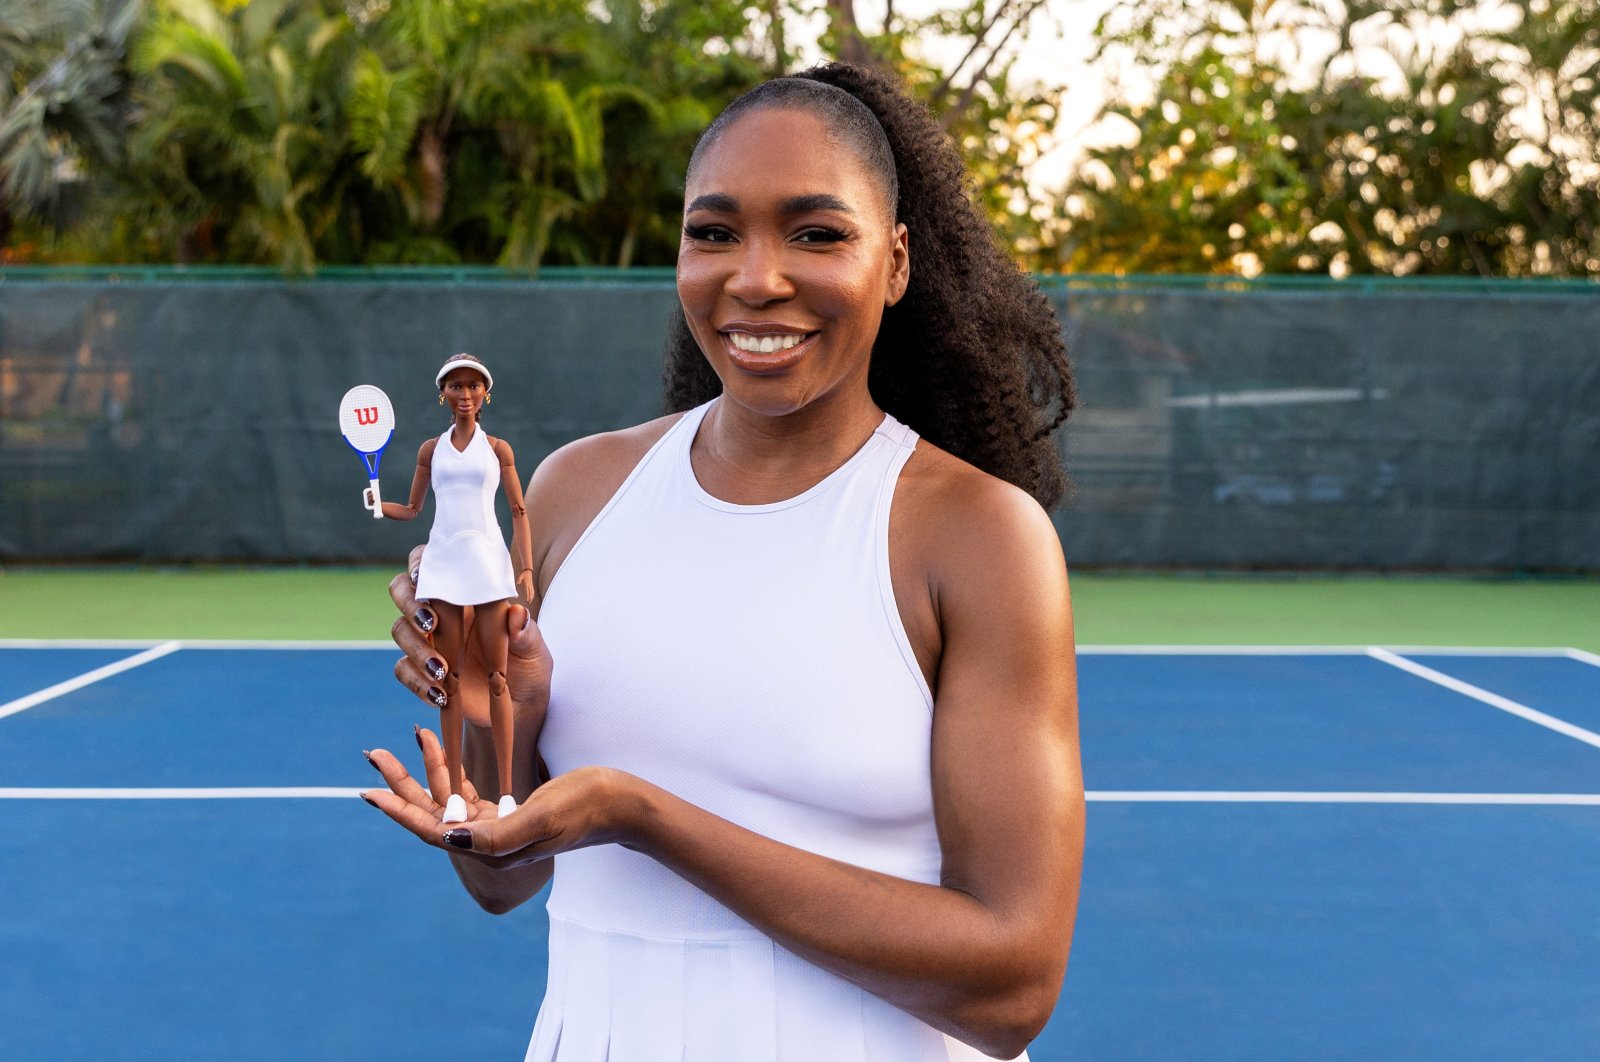 Undated photo shows U.S. Tennis Player Venus Williams poses with a Barbie doll, Puerto Rico. (Reuters Photo)